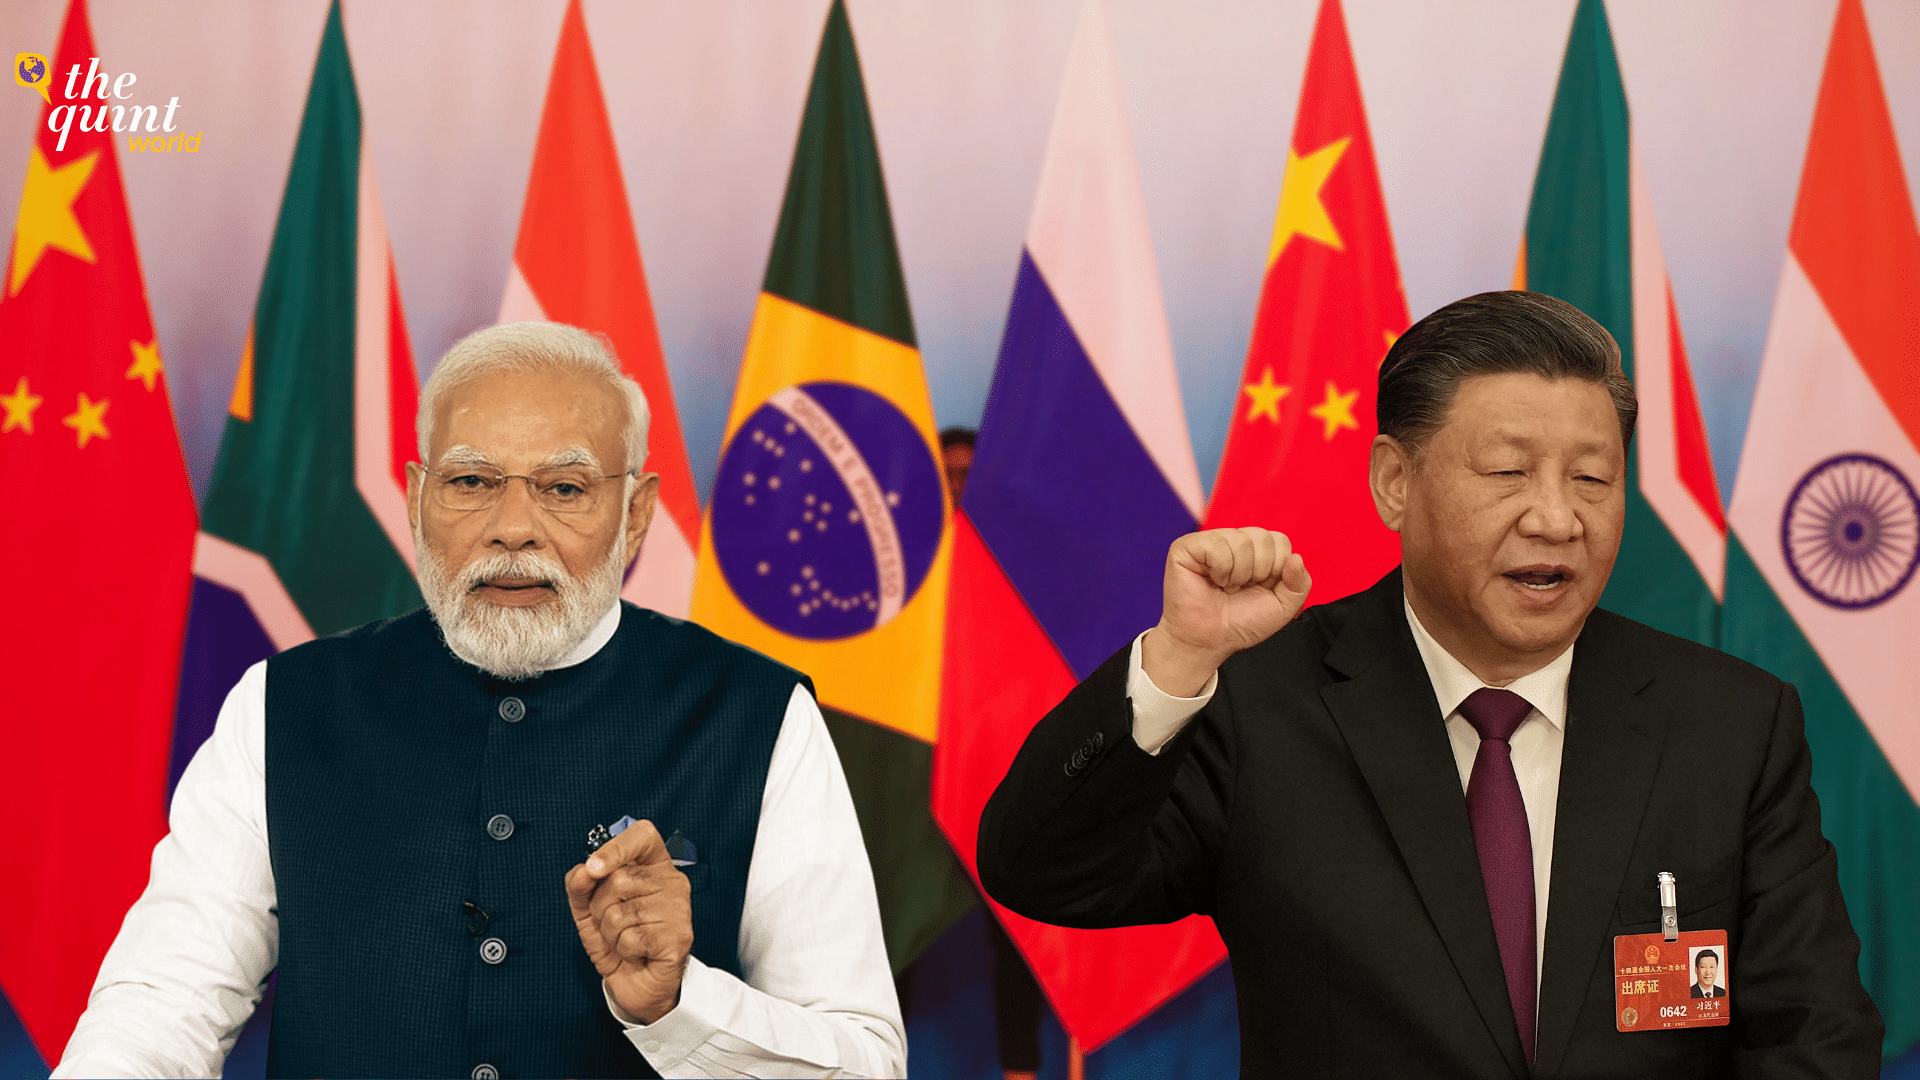 <div class="paragraphs"><p>The first day will see a leaders retreat where Modi will come alongside Chinese President Xi Jinping for the first time since their quick talk on the sidelines of the G20 summit in Bali last year.</p></div>